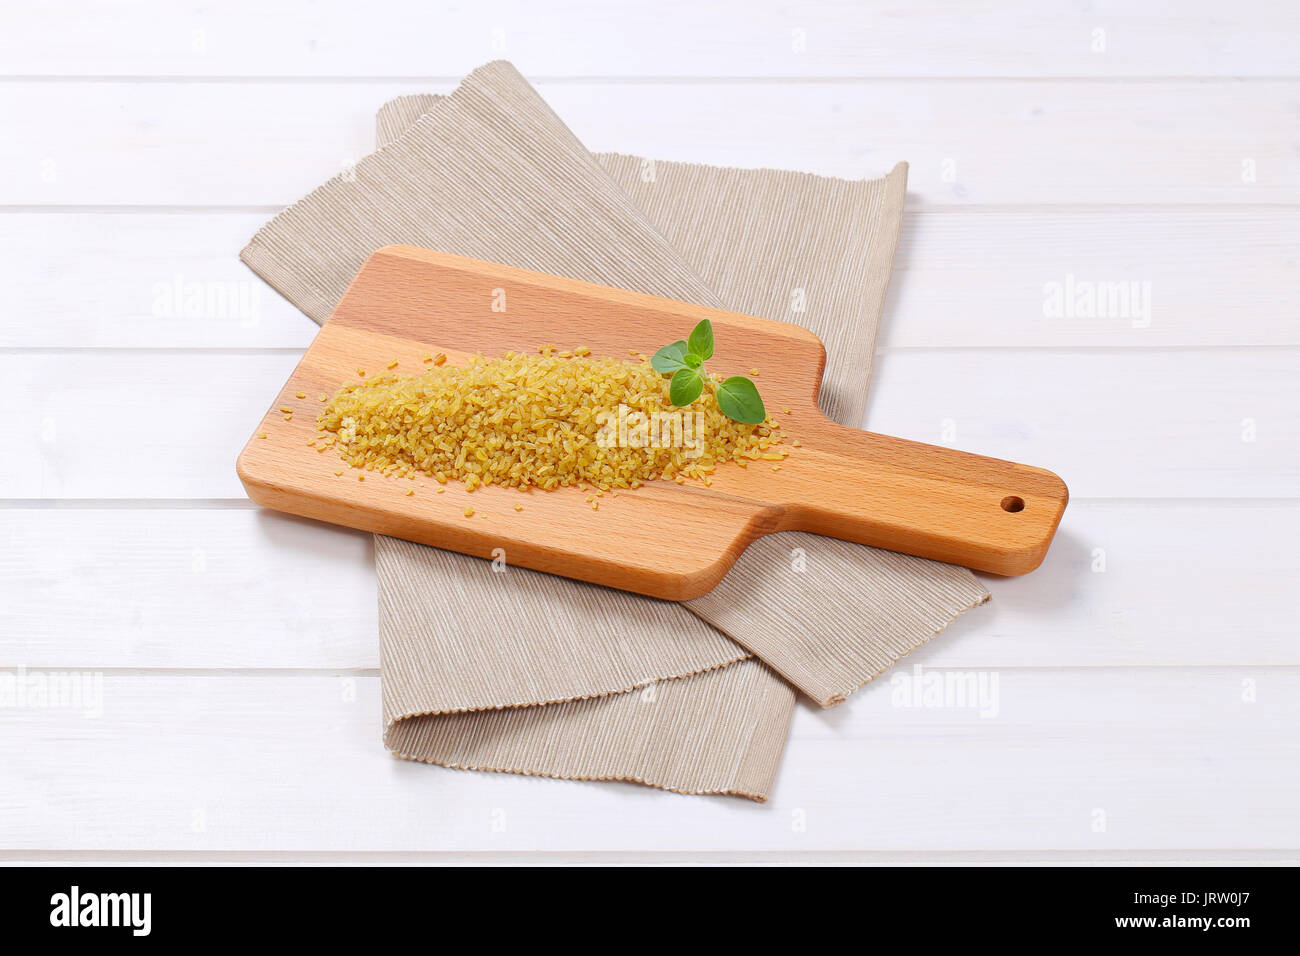 pile of dry wheat bulgur on wooden cutting board Stock Photo